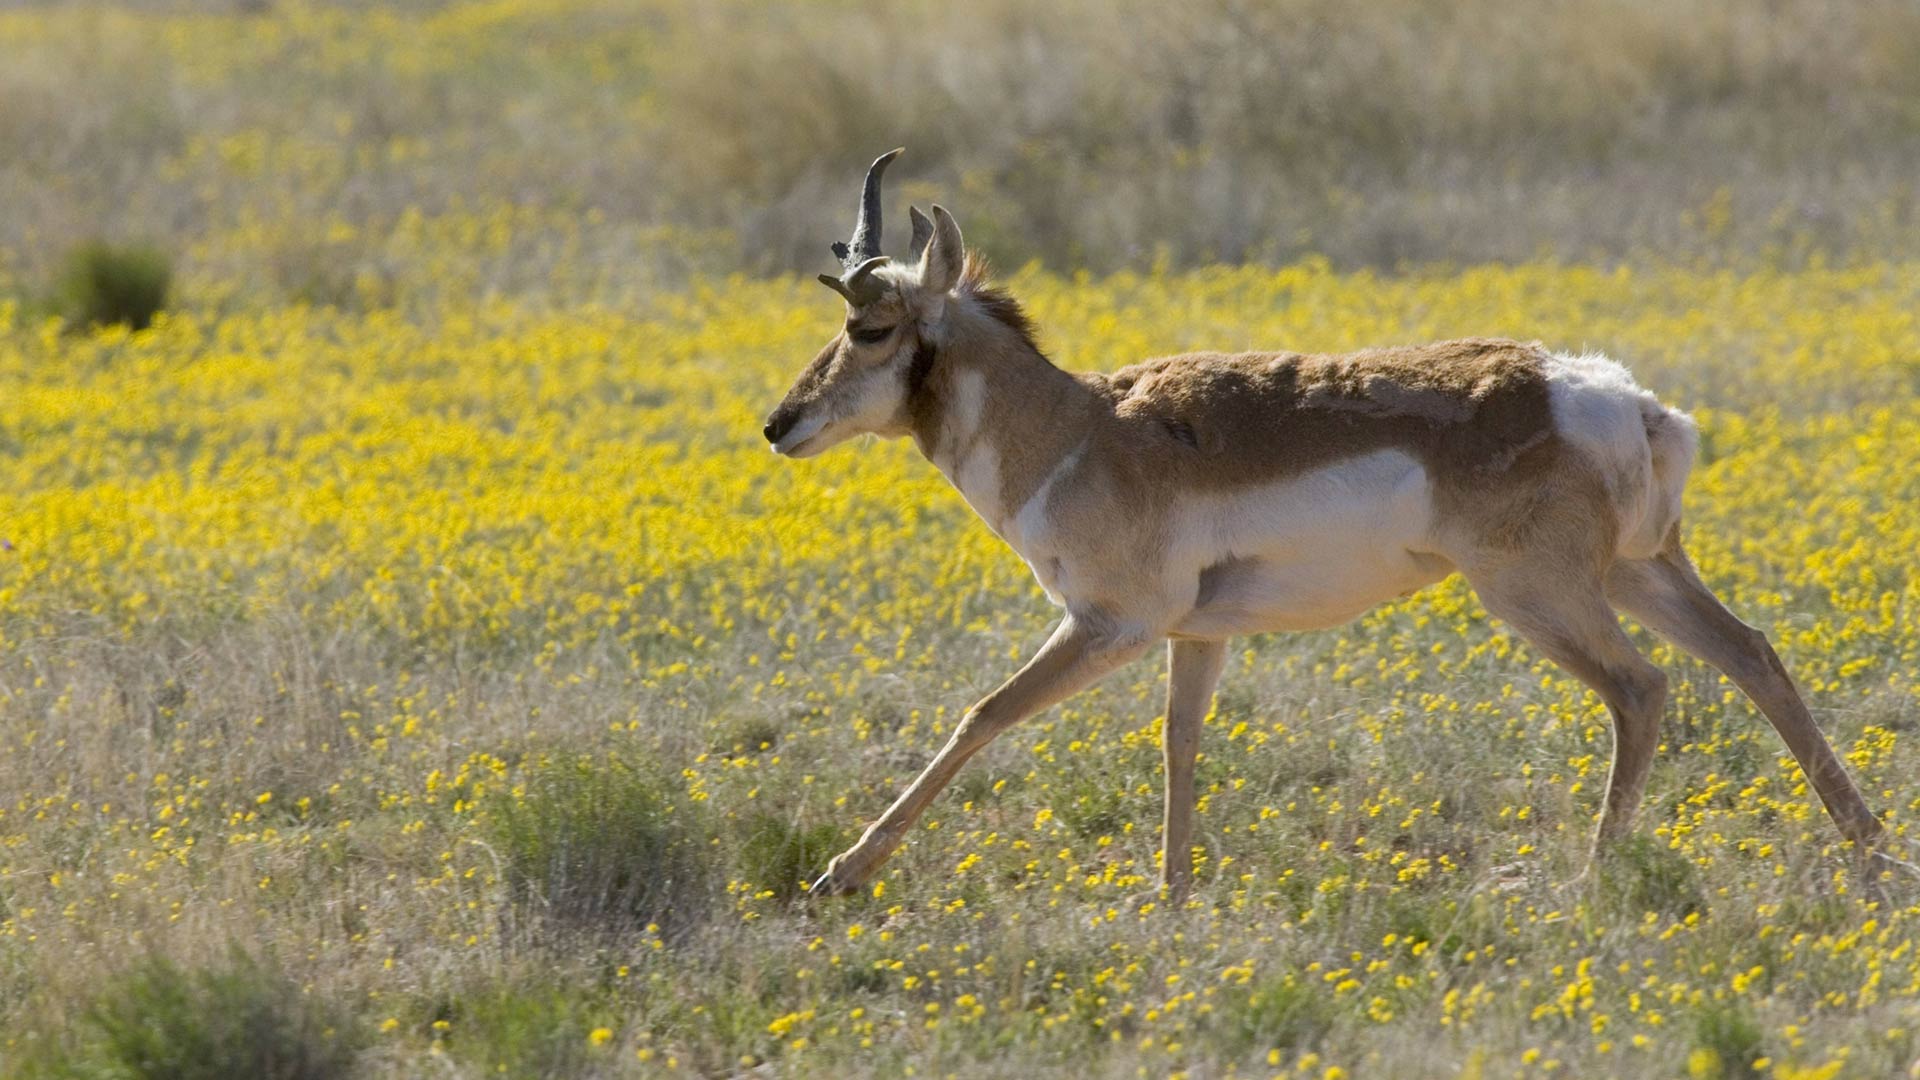 A sonoran pronghorn in a field in Southern Arizona.